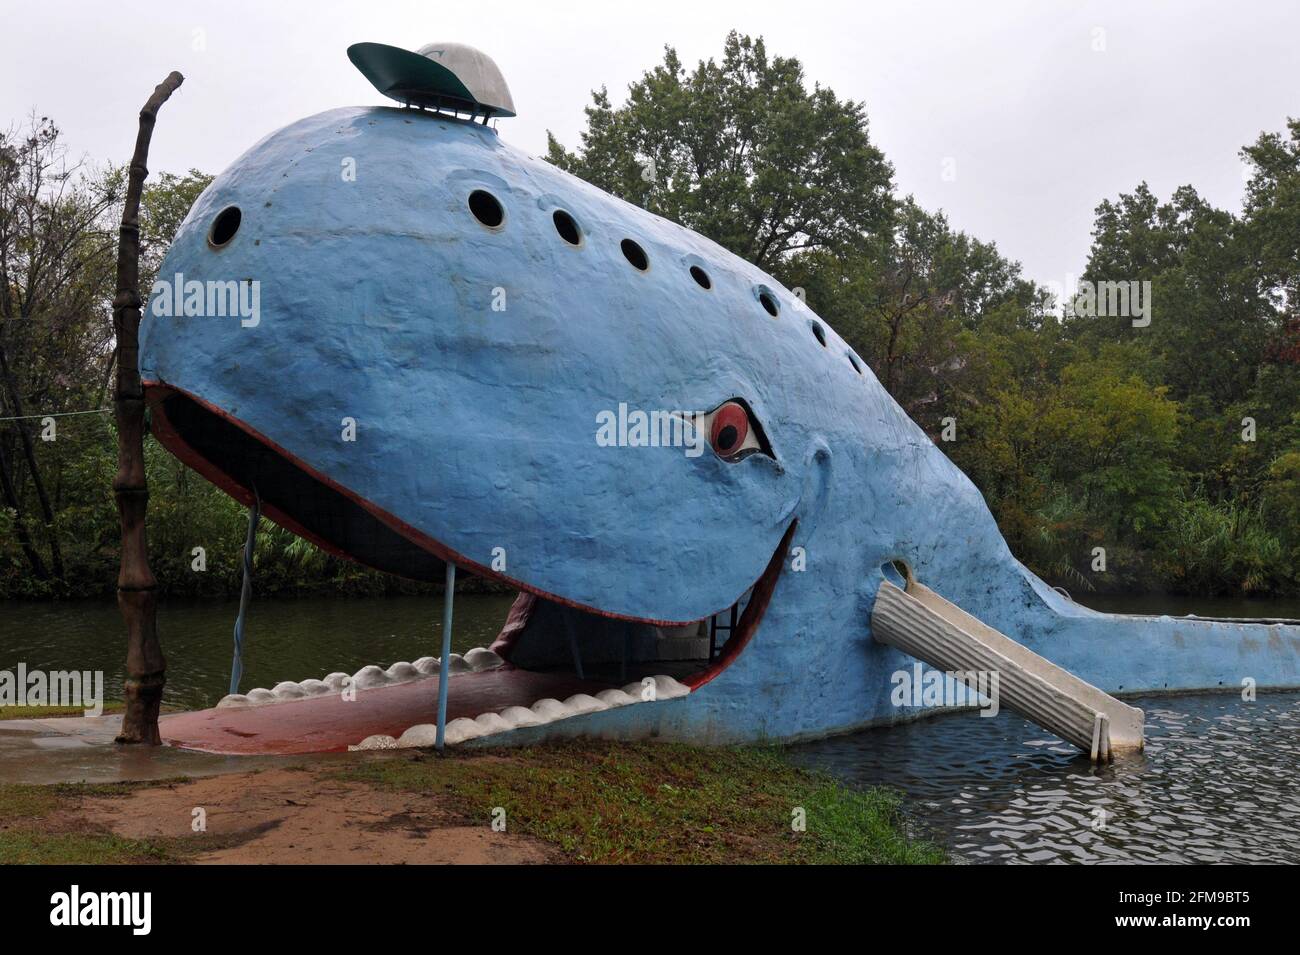 Created in the 1970s, the Blue Whale of Catoosa is a popular roadside attraction and landmark along Route 66 in Oklahoma. Stock Photo